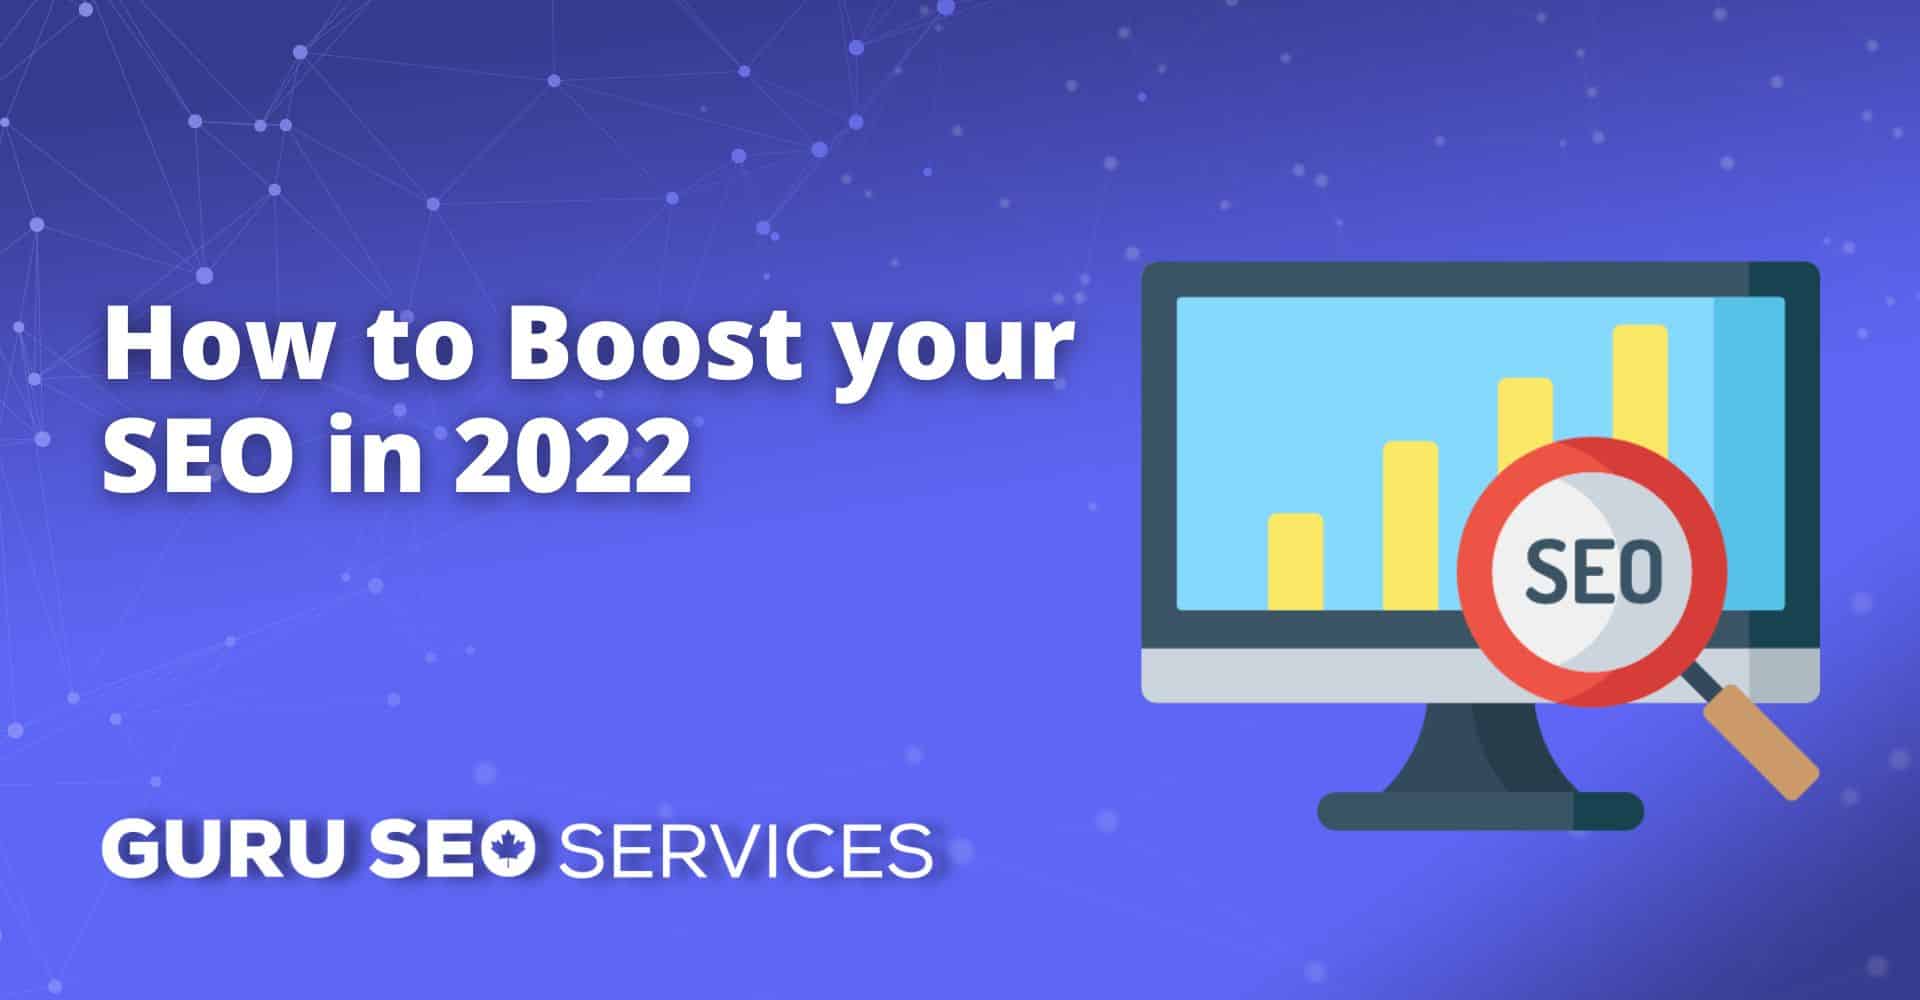 Learn how to boost your SEO in 2021 with effective web design and top-notch SEO services.